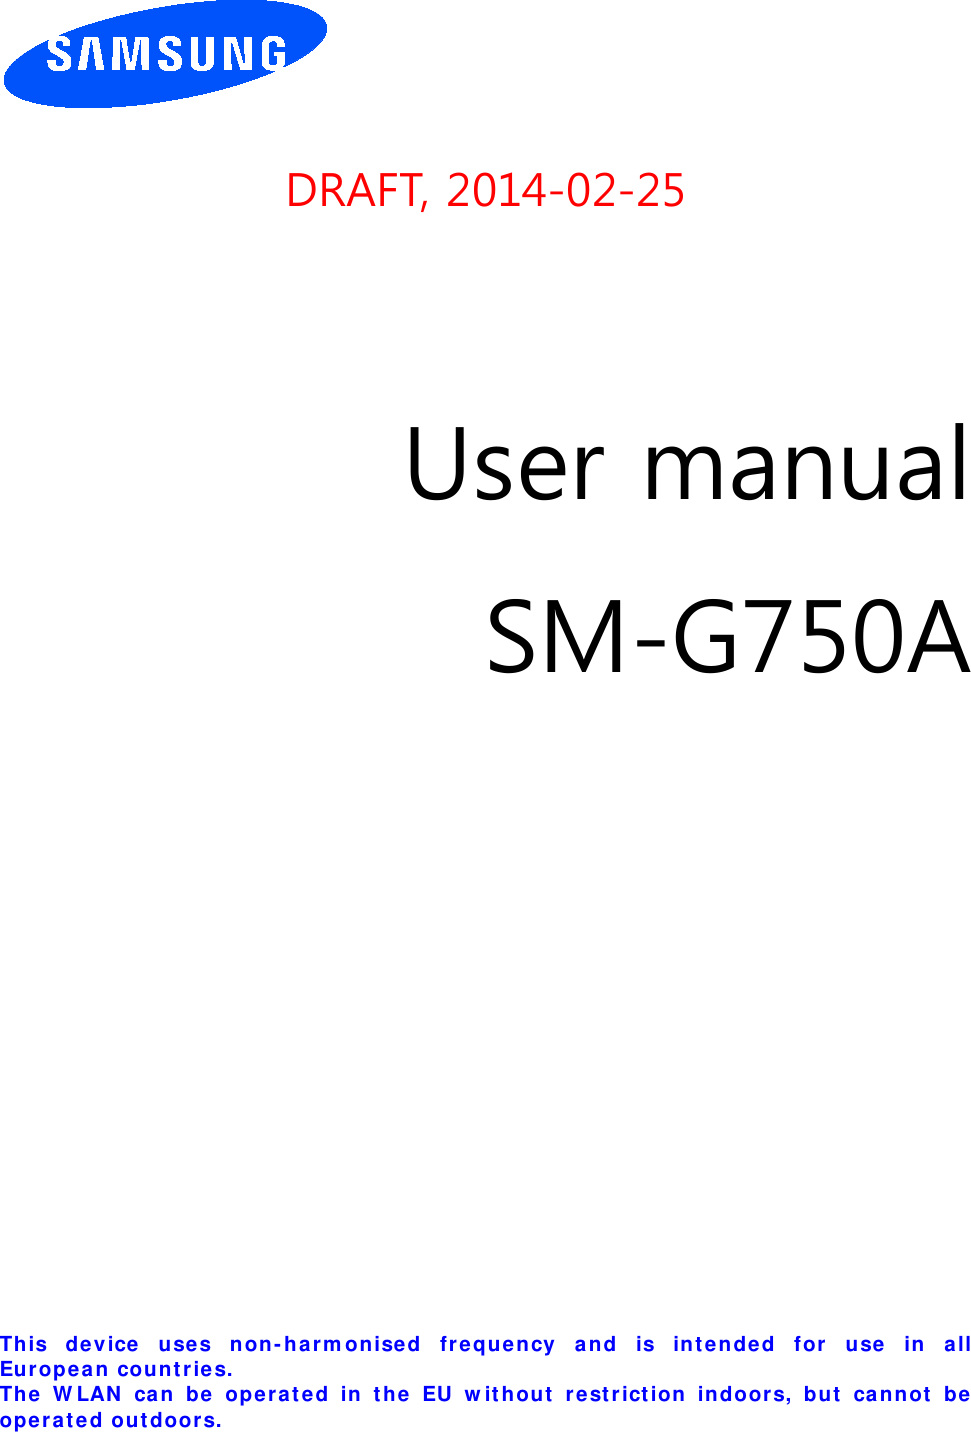       DRAFT, 2014-02-25     User manual SM-G750A                  This de vice uses n on-ha rm onise d frequency a nd is inten de d f or  use  in all Eu ropea n count r ie s.   Th e W LAN  can be oper at ed in t he EU w it hou t  r e st r ict ion  indoor s, but  ca nnot  be oper ated outdoor s.  